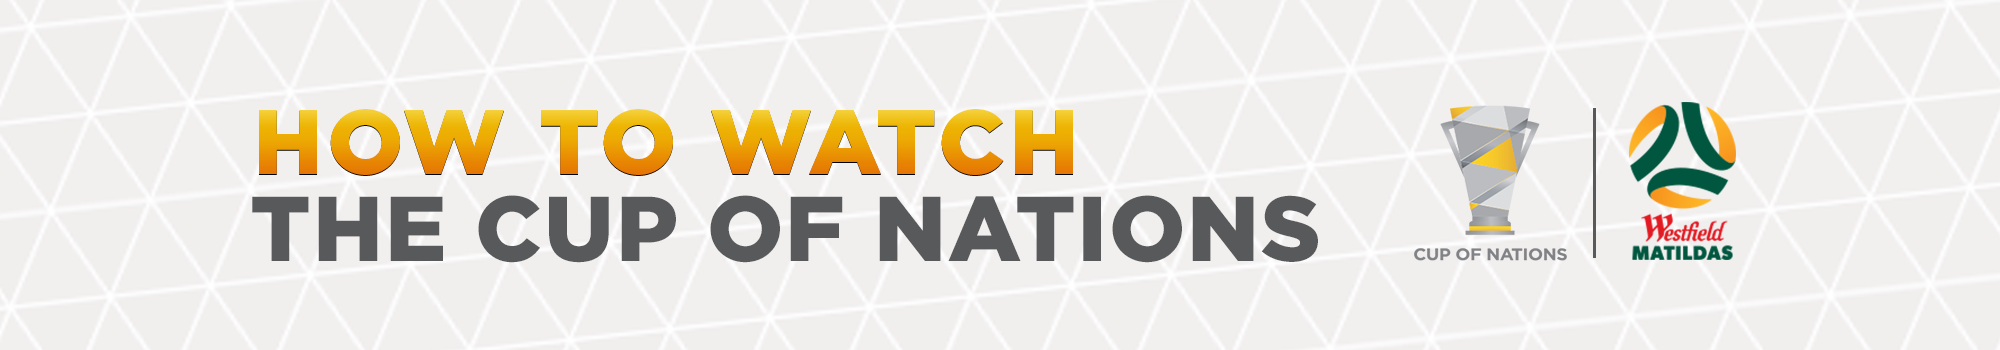 HowtoWatchCupofNations Banner